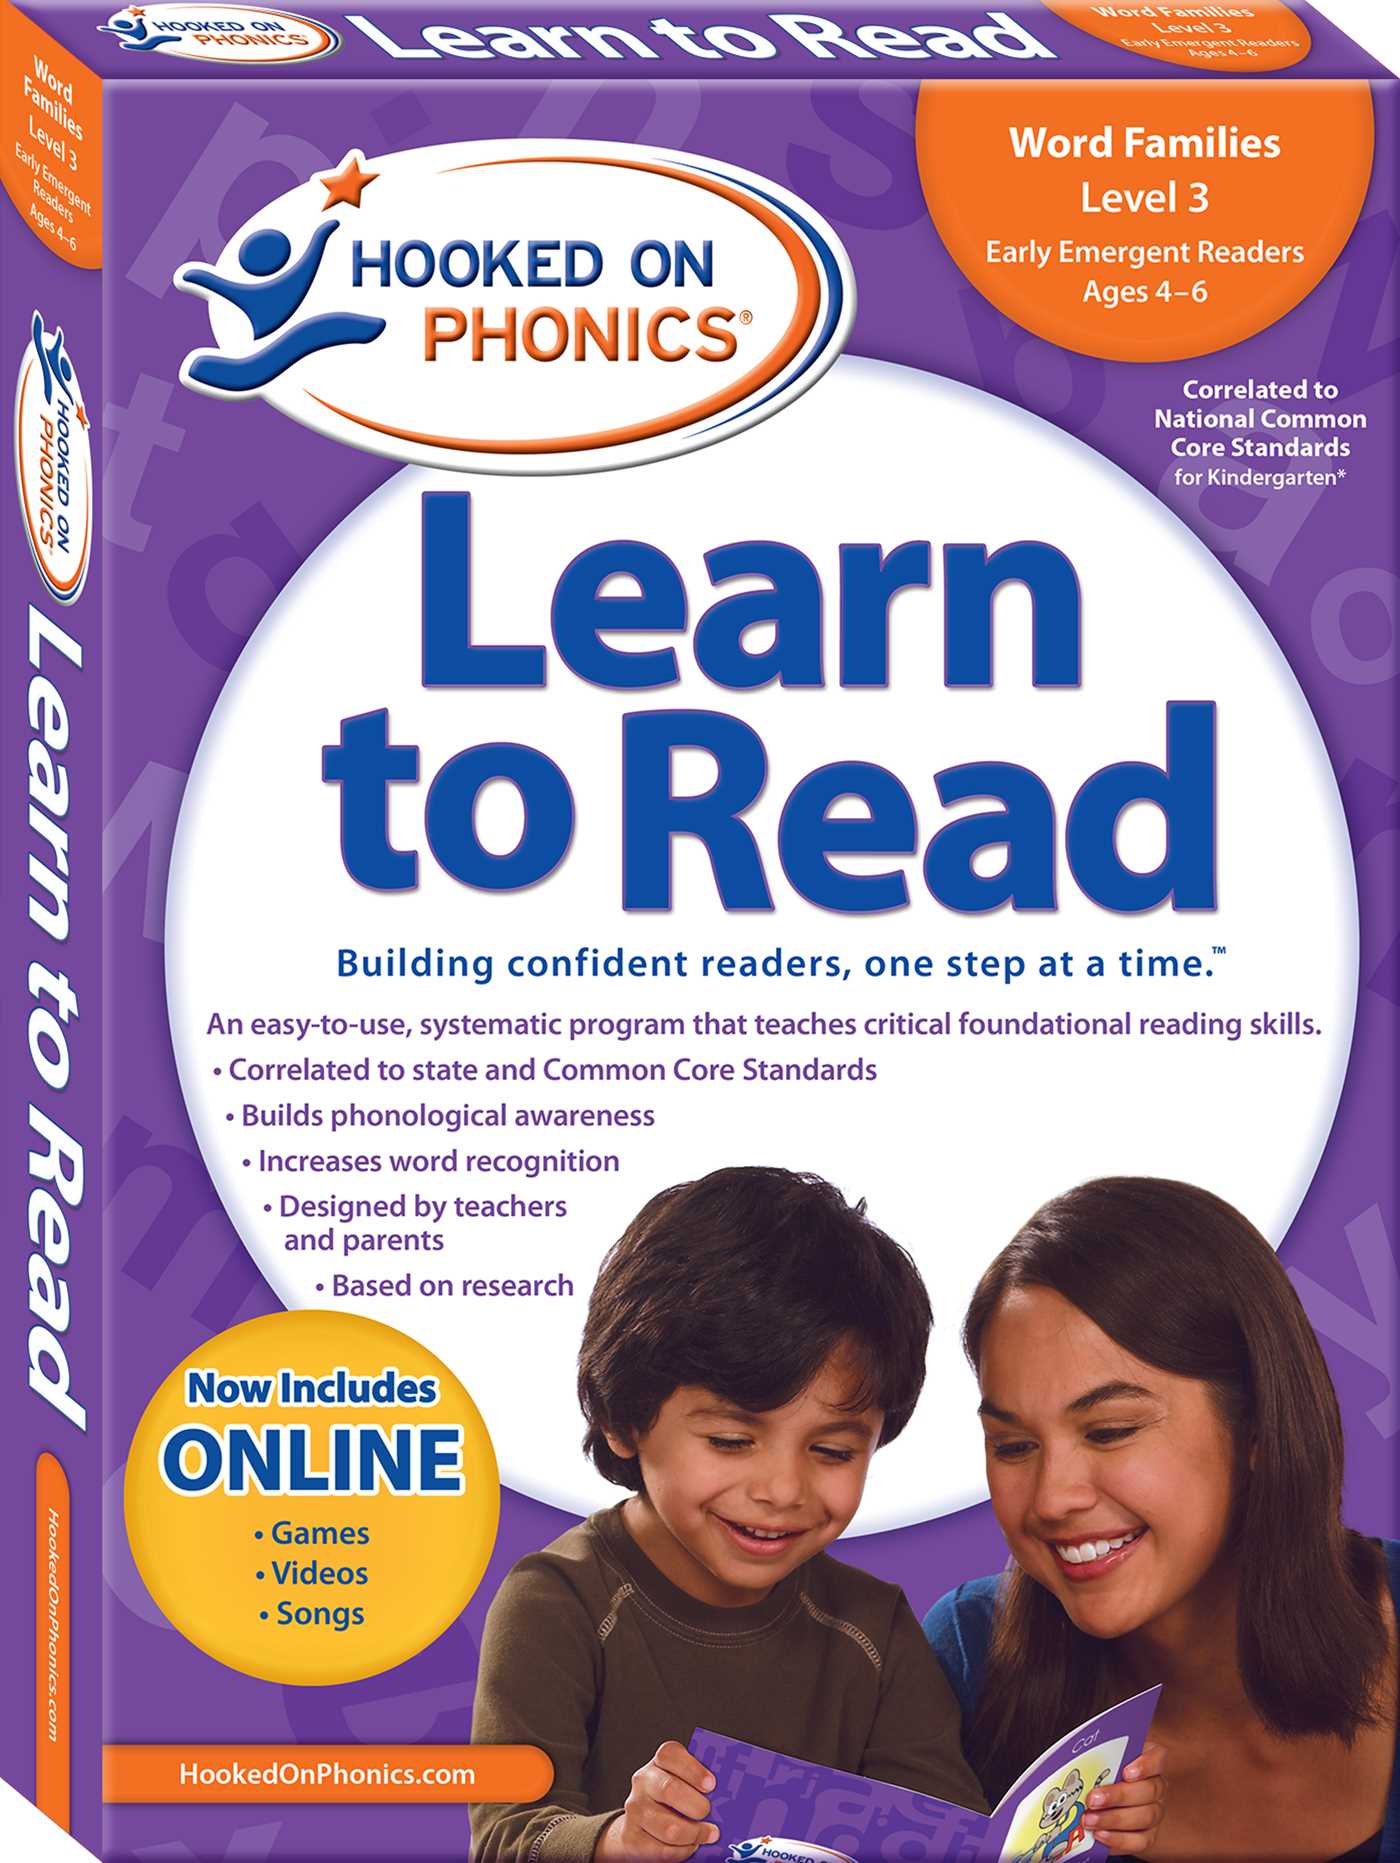 Learn to Read: Hooked on Phonics Learn to Read - Level 3 : Word Families (Early Emergent Readers | Kindergarten | Ages 4-6) (Series #3) (Paperback) - image 1 of 8